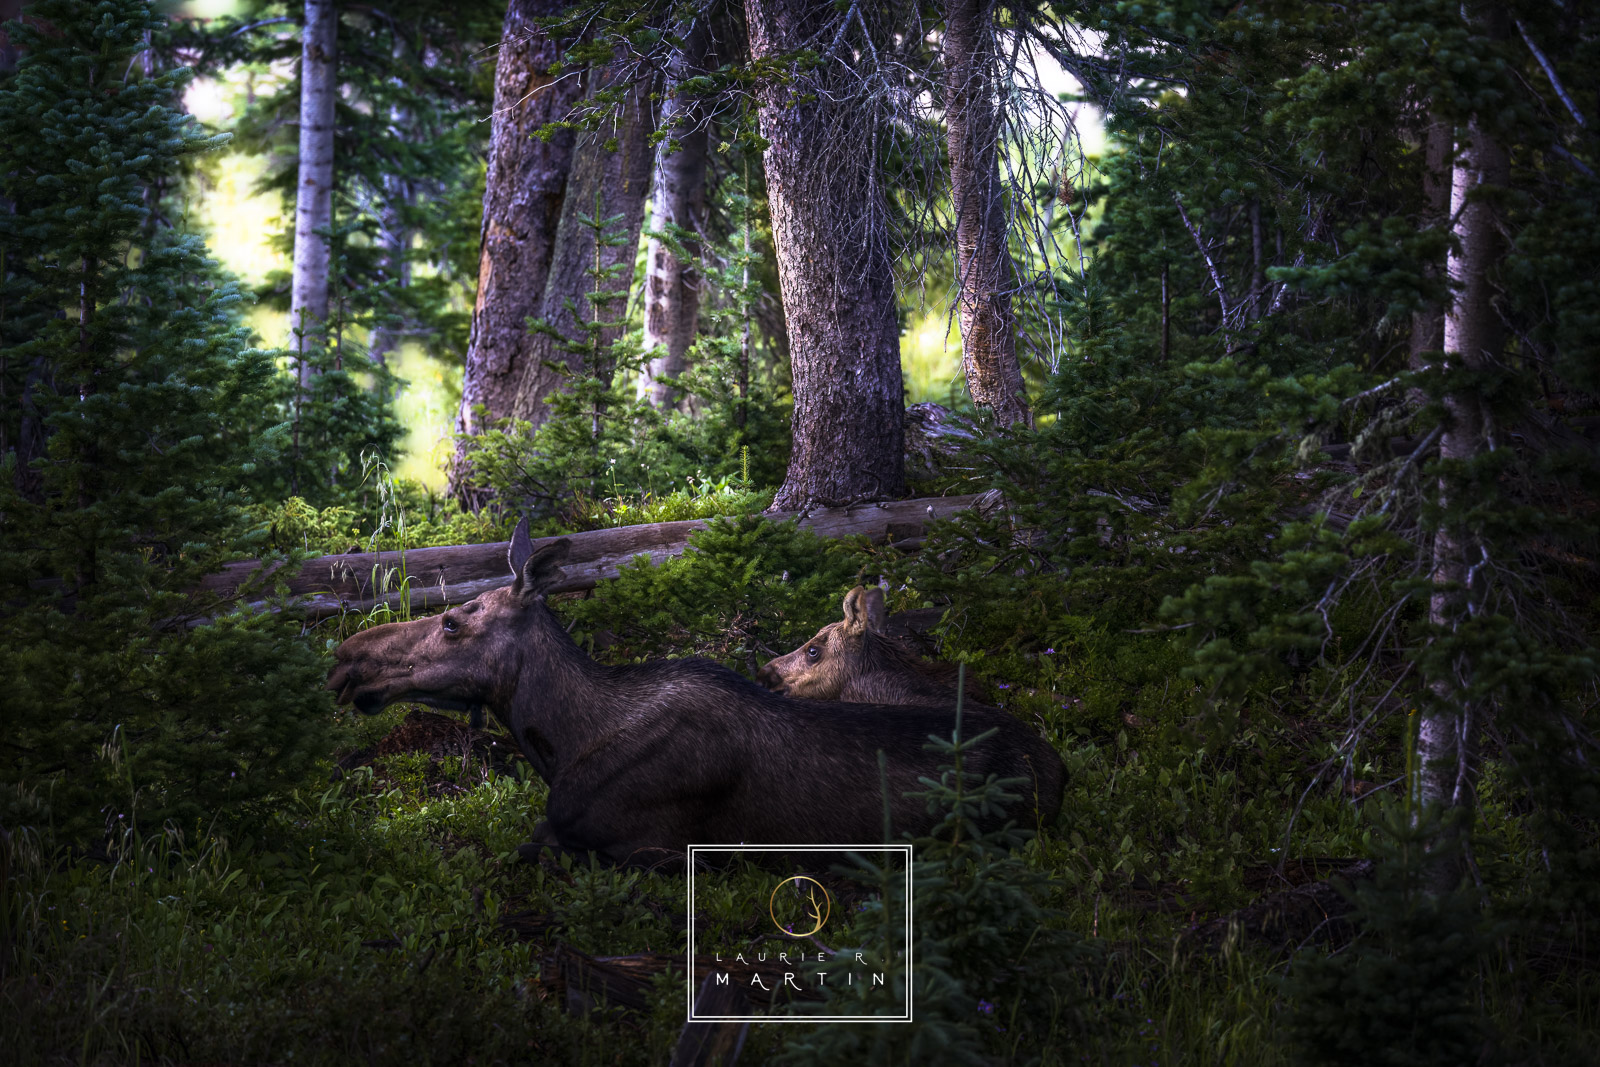 A protective mother cow moose sits quietly with her new baby. These two blended perfectly into the natural forest and were hard...